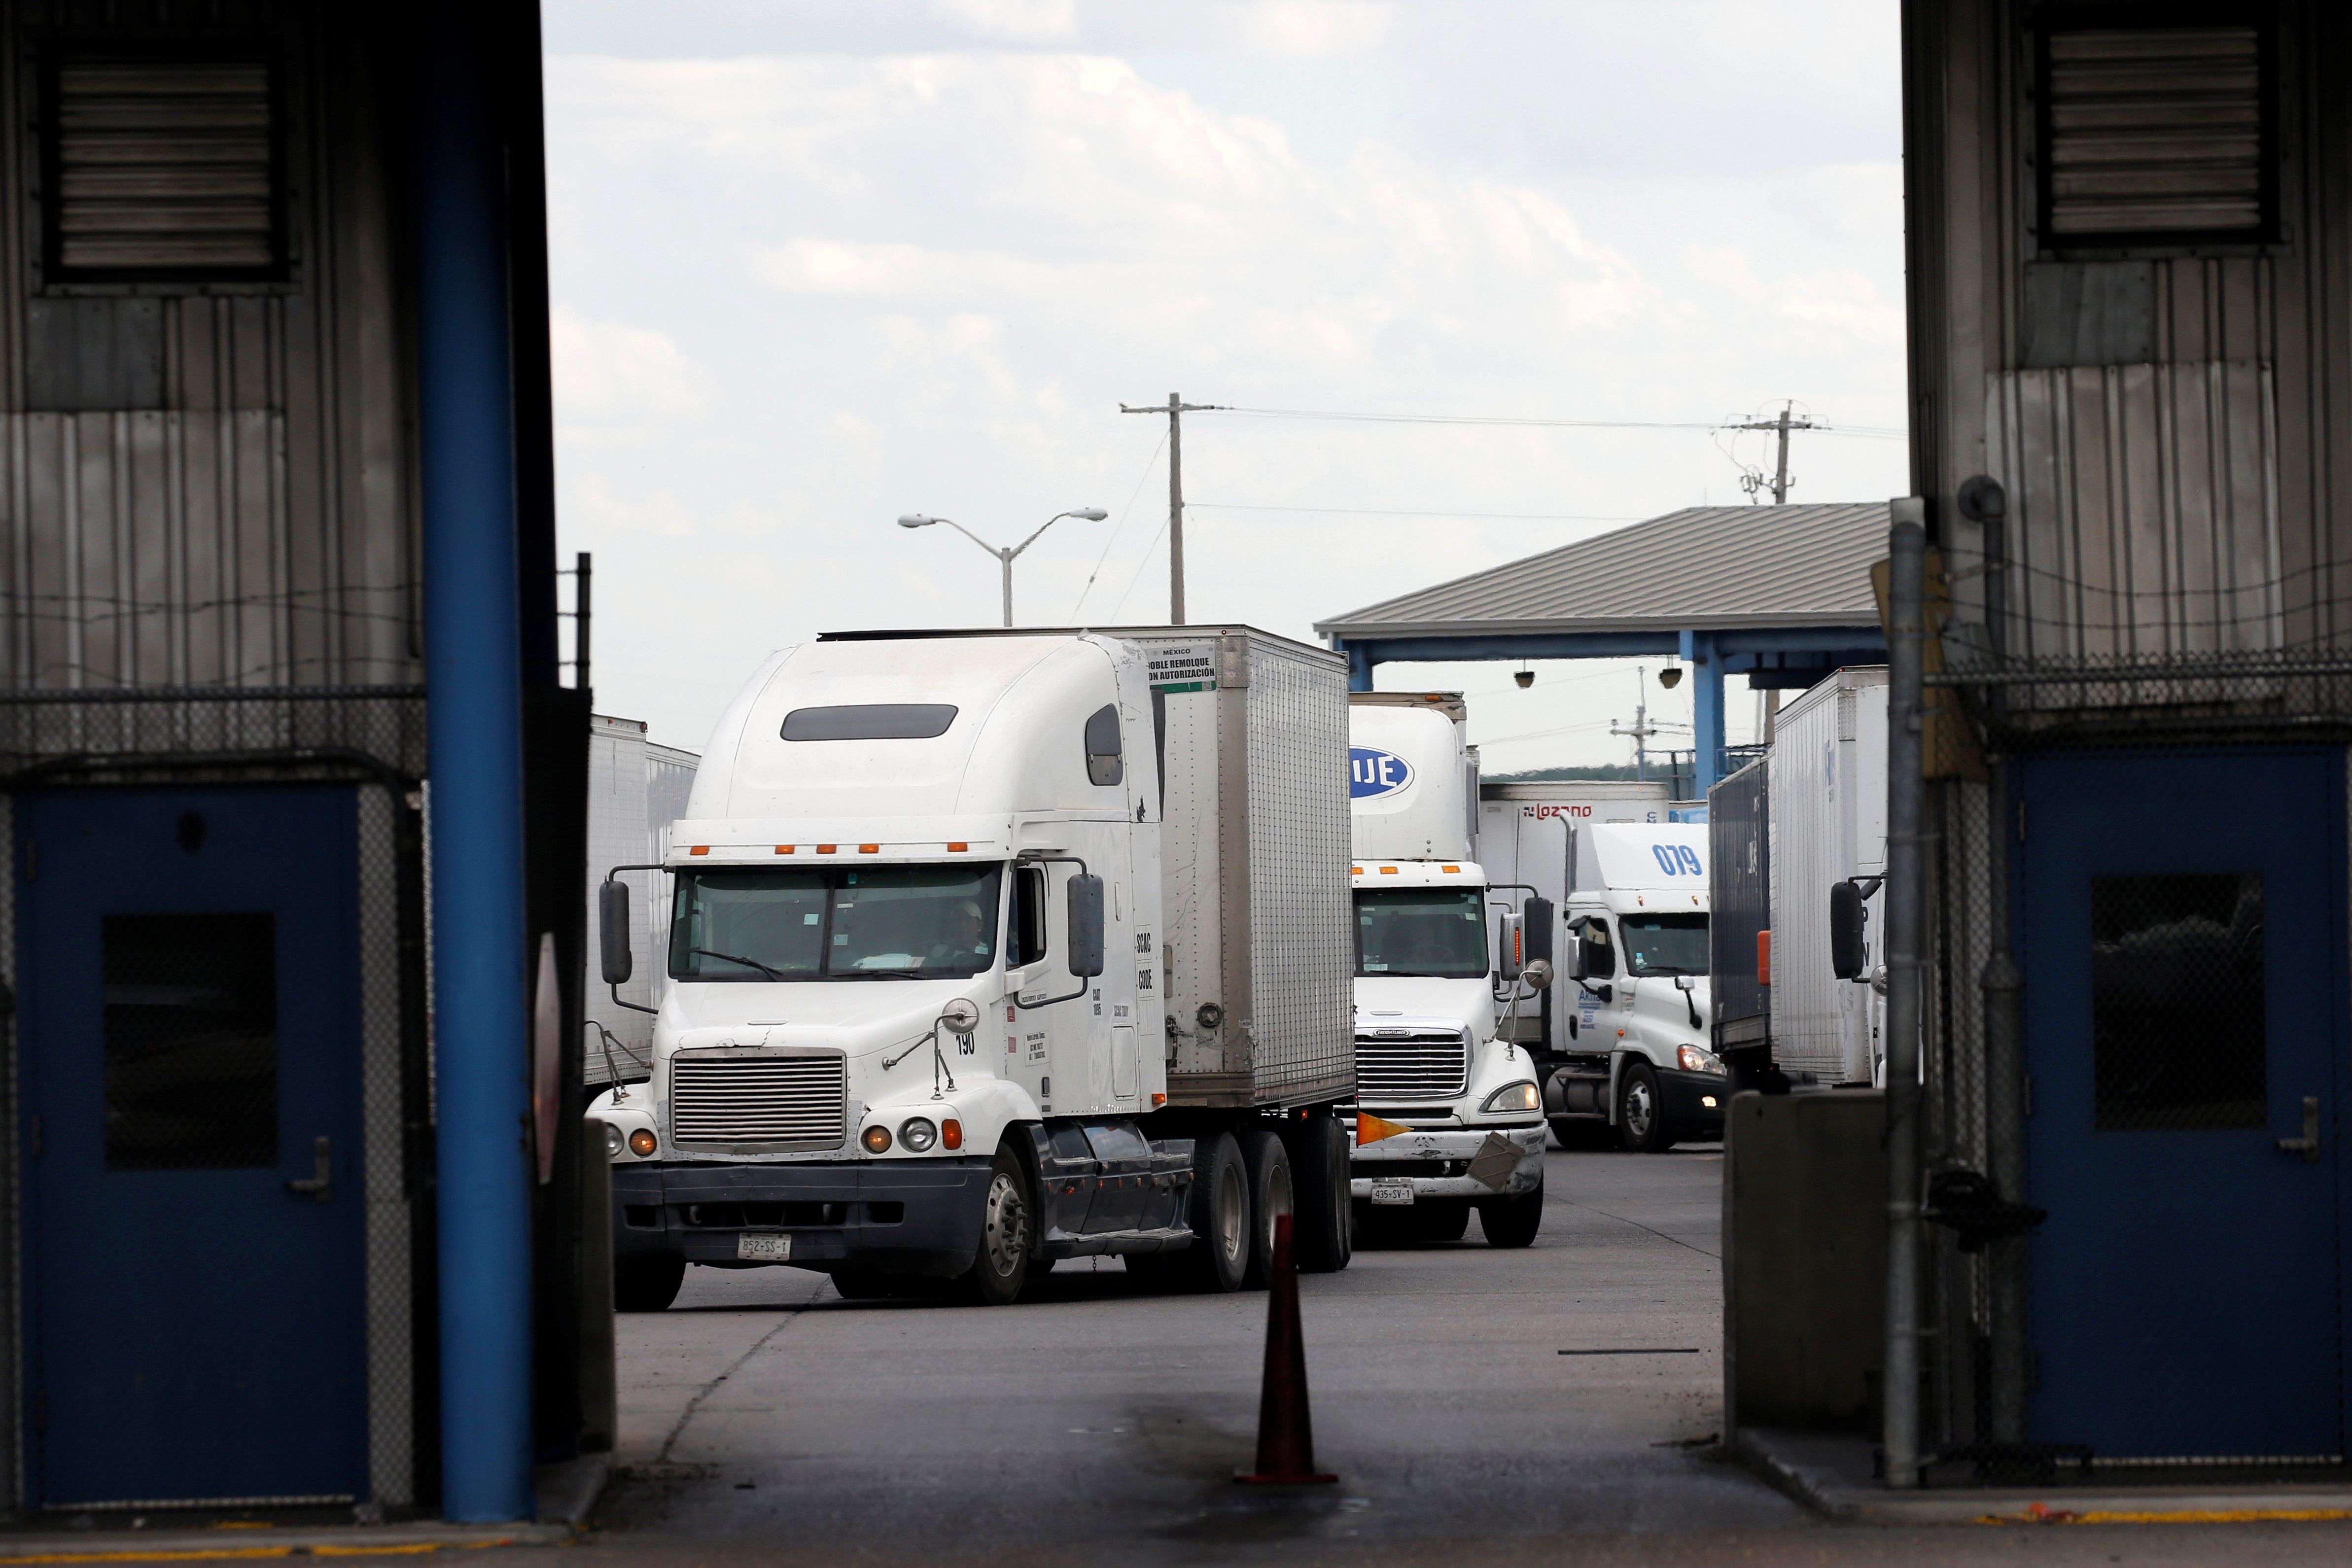 Trucks are seen after crossing the borderline from Mexico into the U.S. at the World Trade Bridge, in Laredo